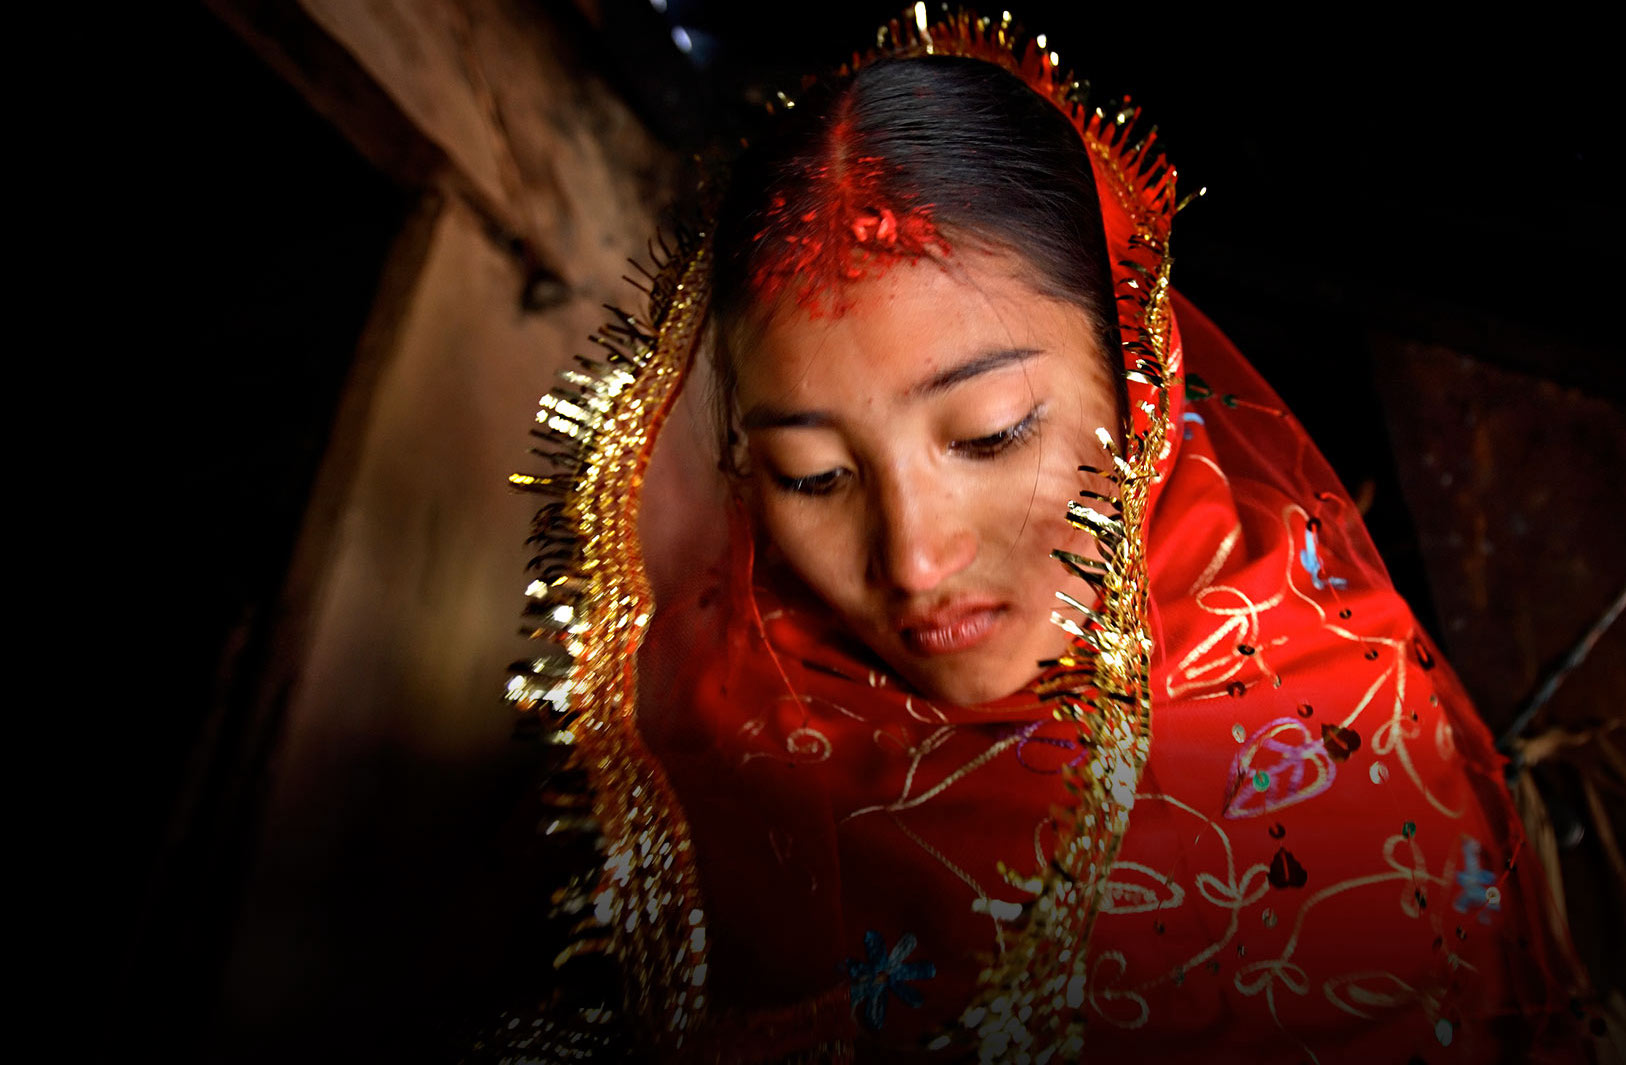 Maa Beti Ka Rape Sex - Child Marriage | Council on Foreign Relations